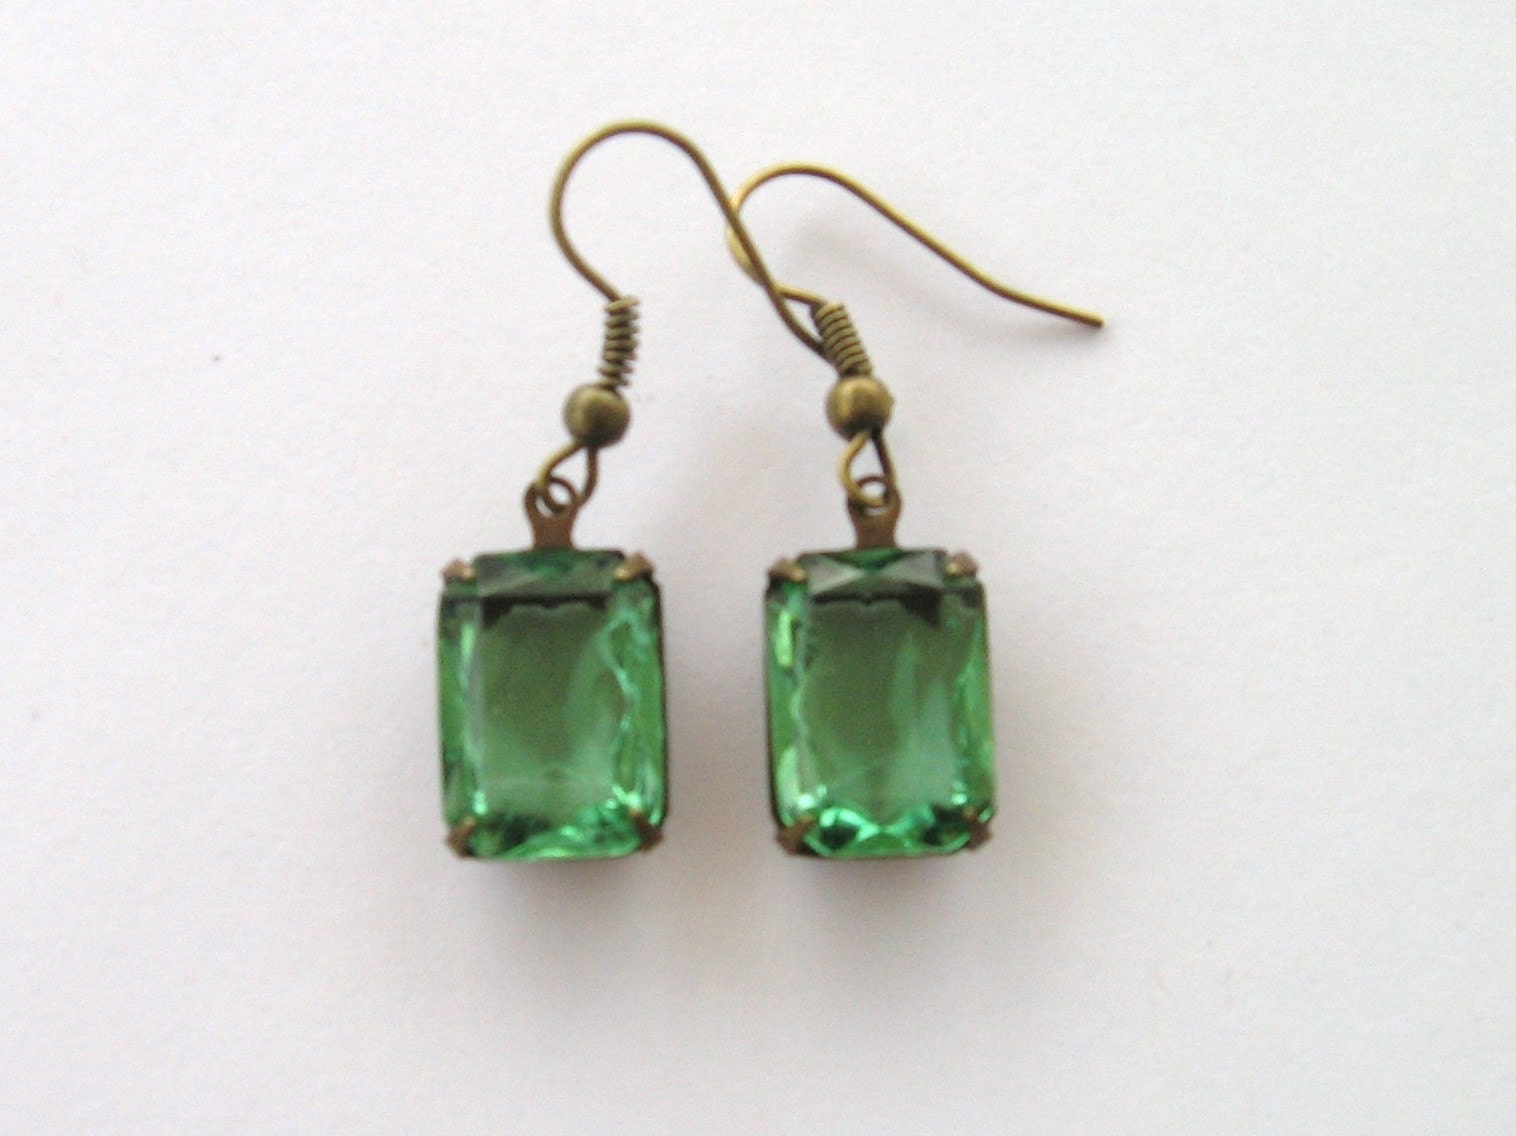 SALE Glam Vintage Jewel Earrings, Pale Green -Ready to Ship